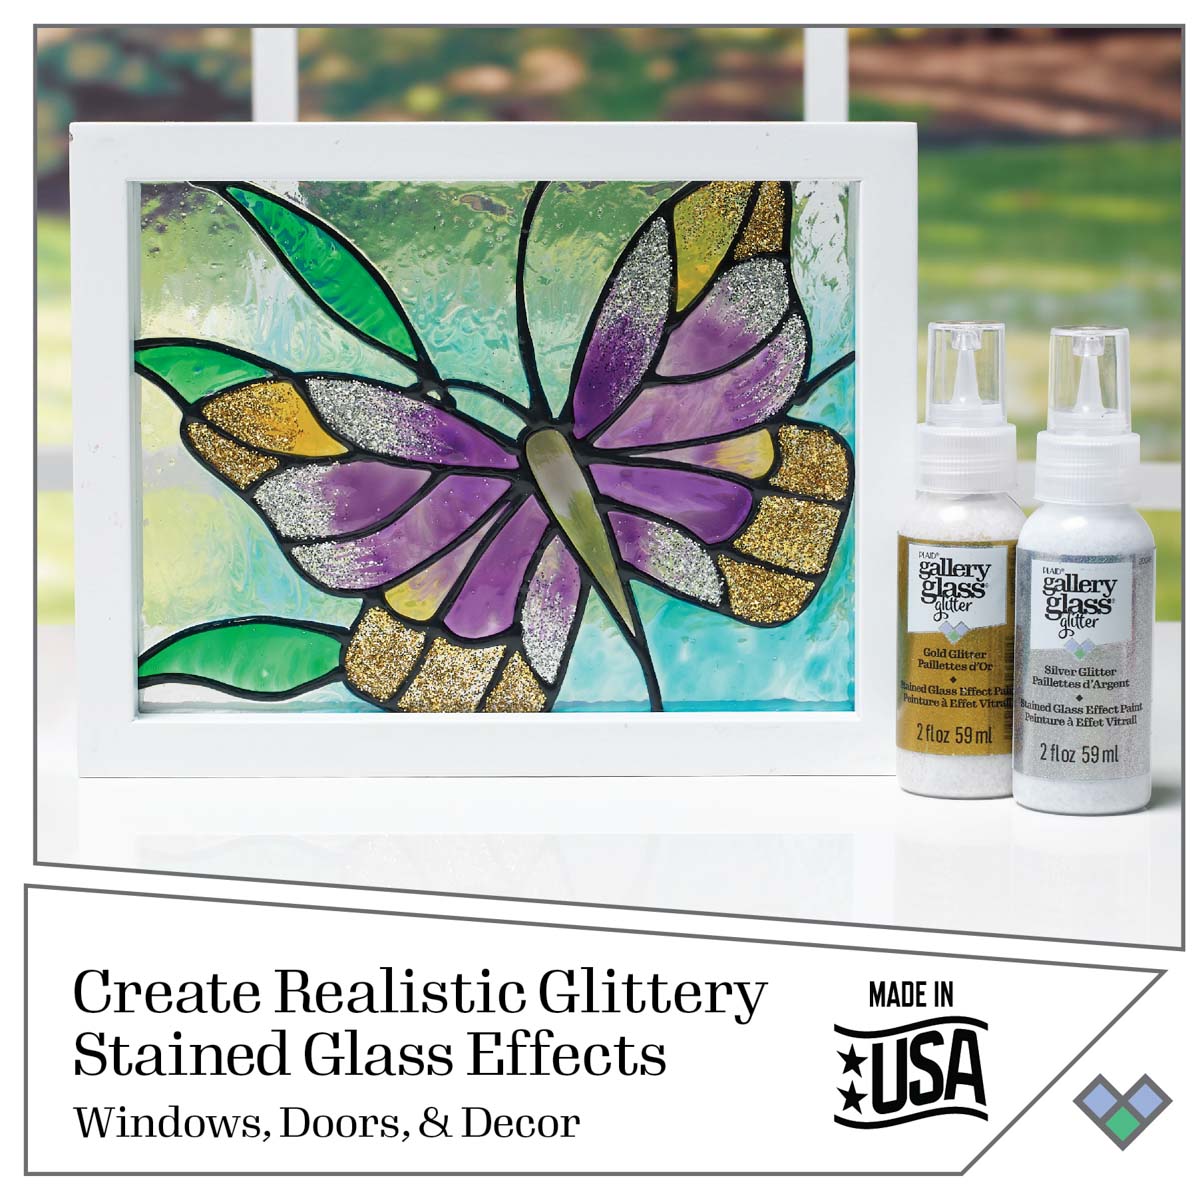 Shop Plaid Gallery Glass ® Stained Glass Effect Paint - Glitter Gold, 2 oz.  - 20044 - 20044